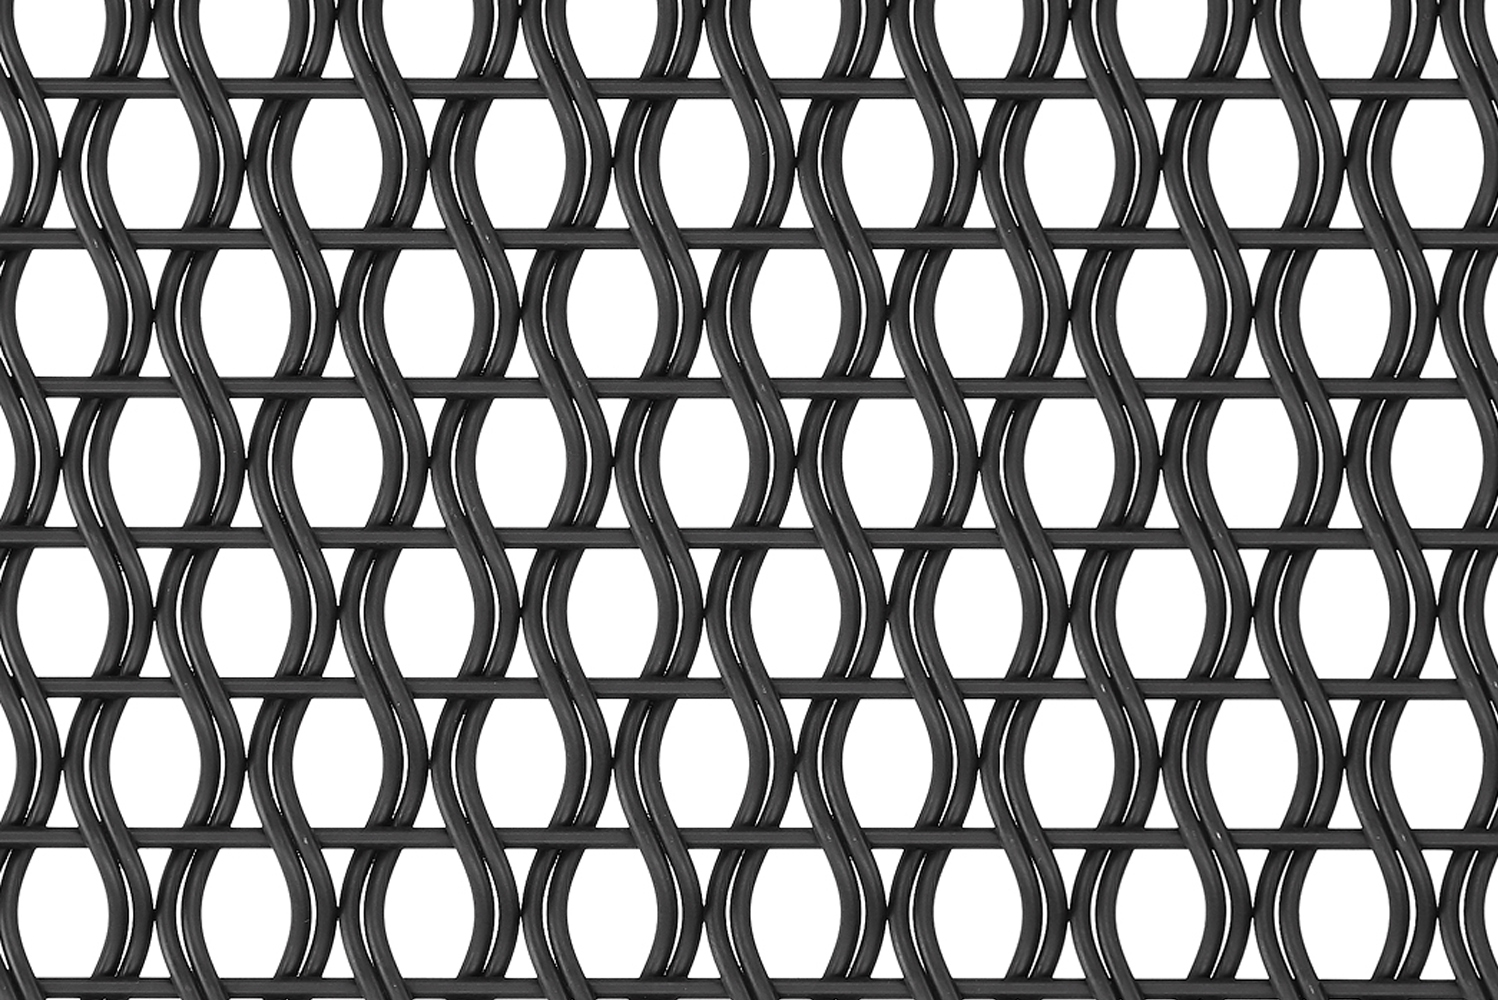 Introducing the latest wire mesh pattern from Banker Wire